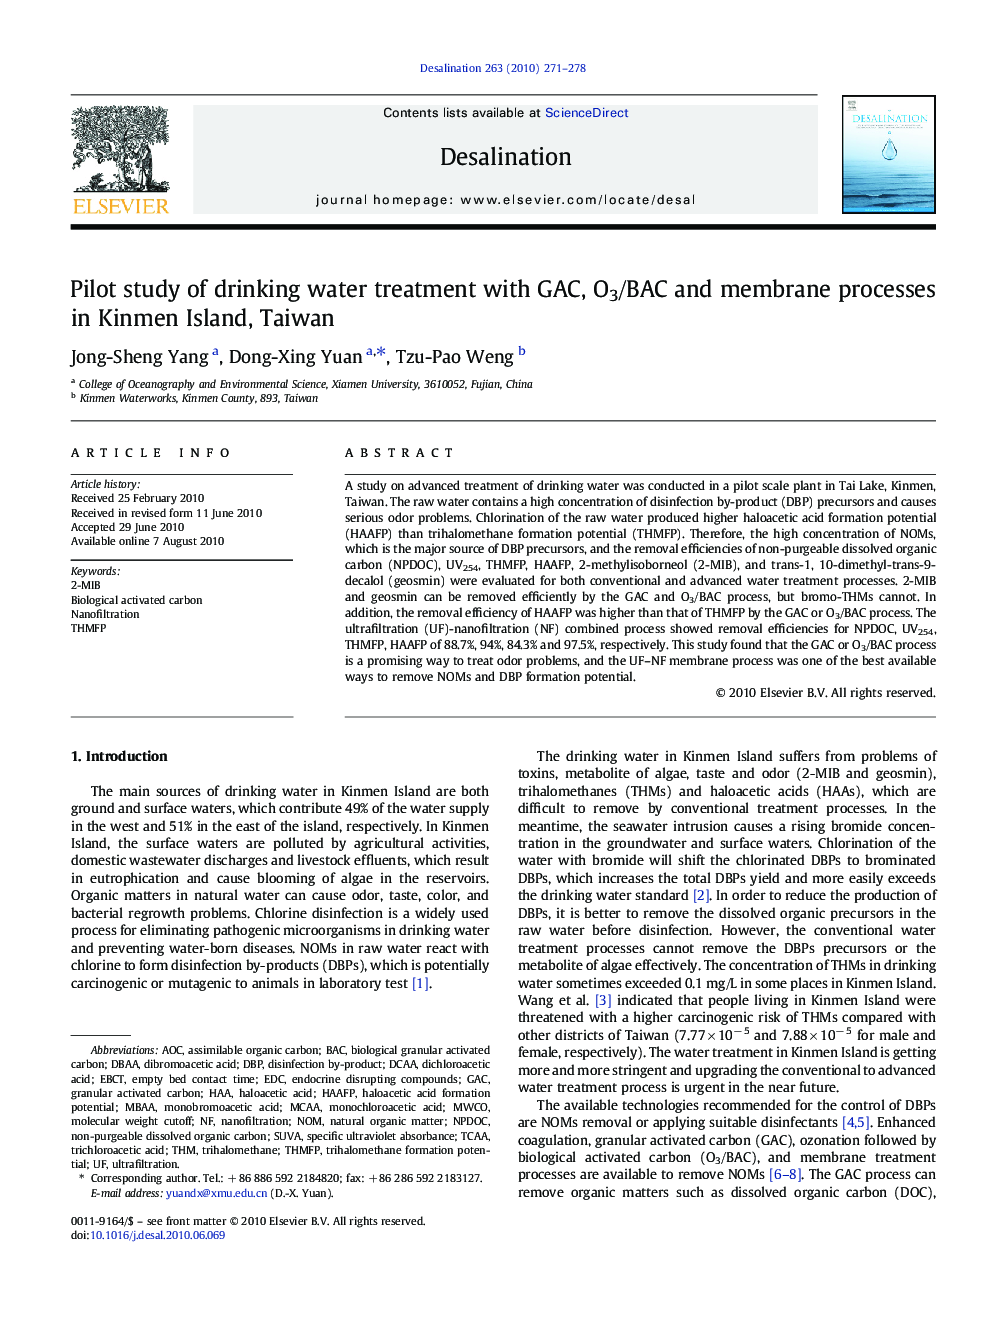 Pilot study of drinking water treatment with GAC, O3/BAC and membrane processes in Kinmen Island, Taiwan